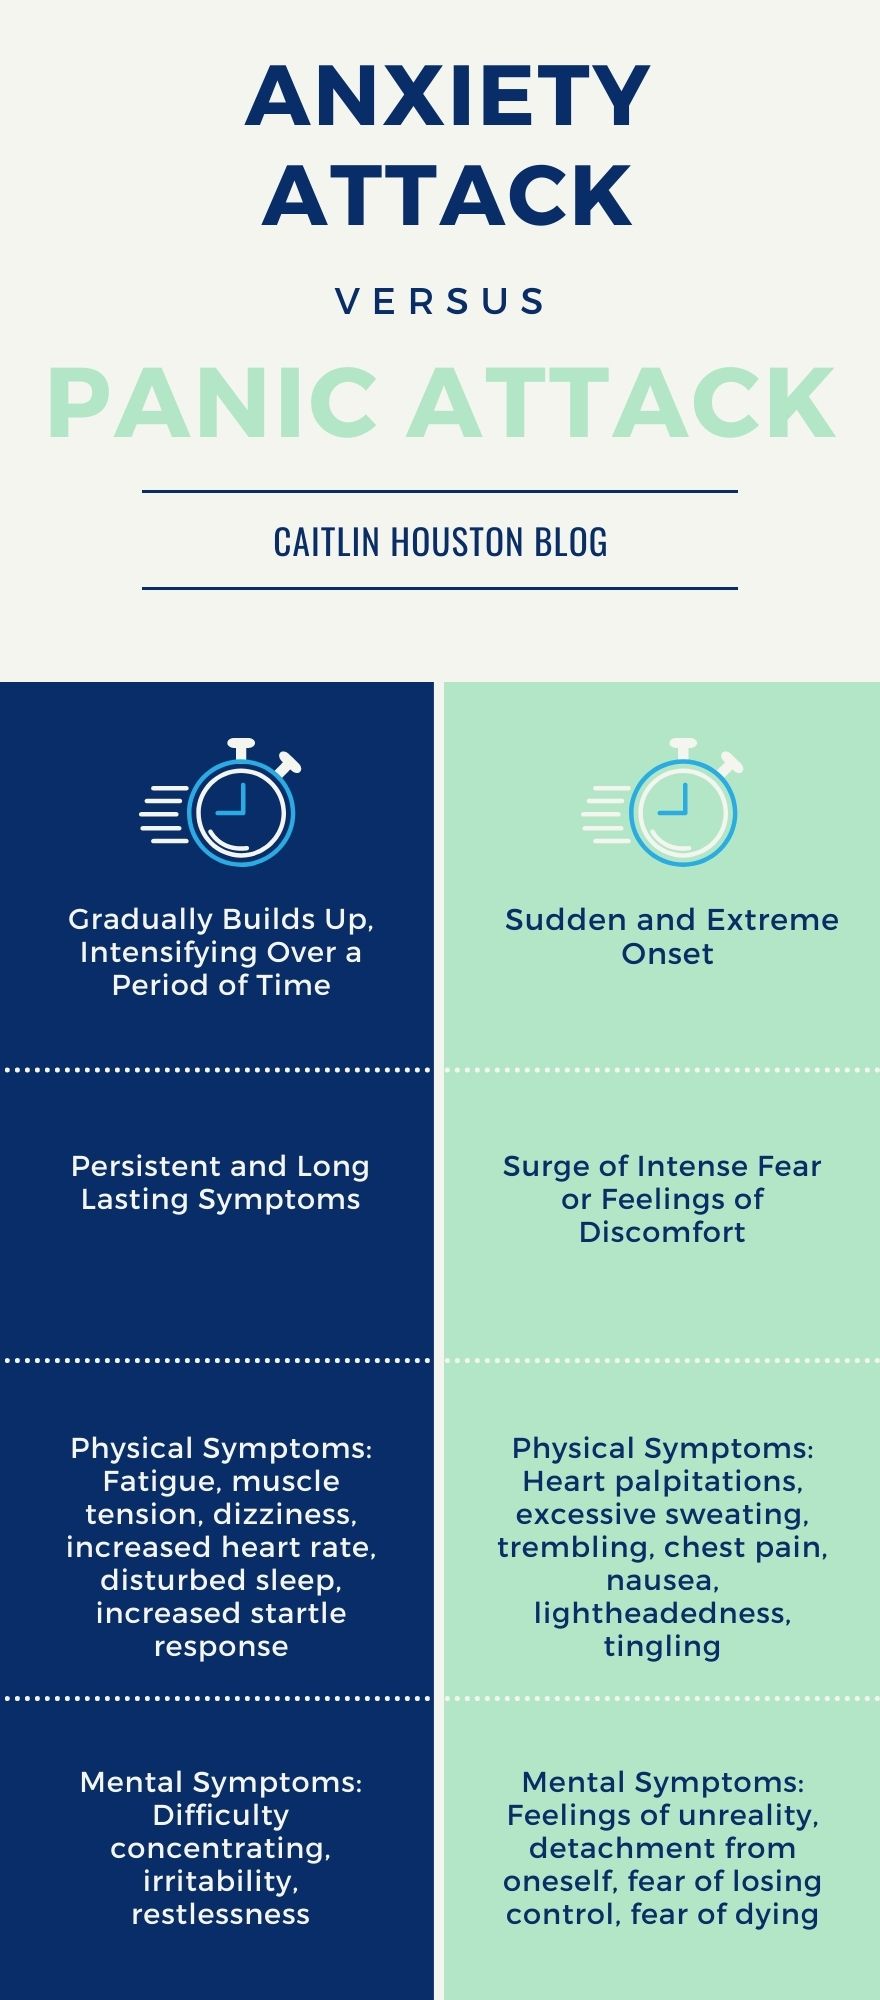 Differences between a panic attack and anxiety attack